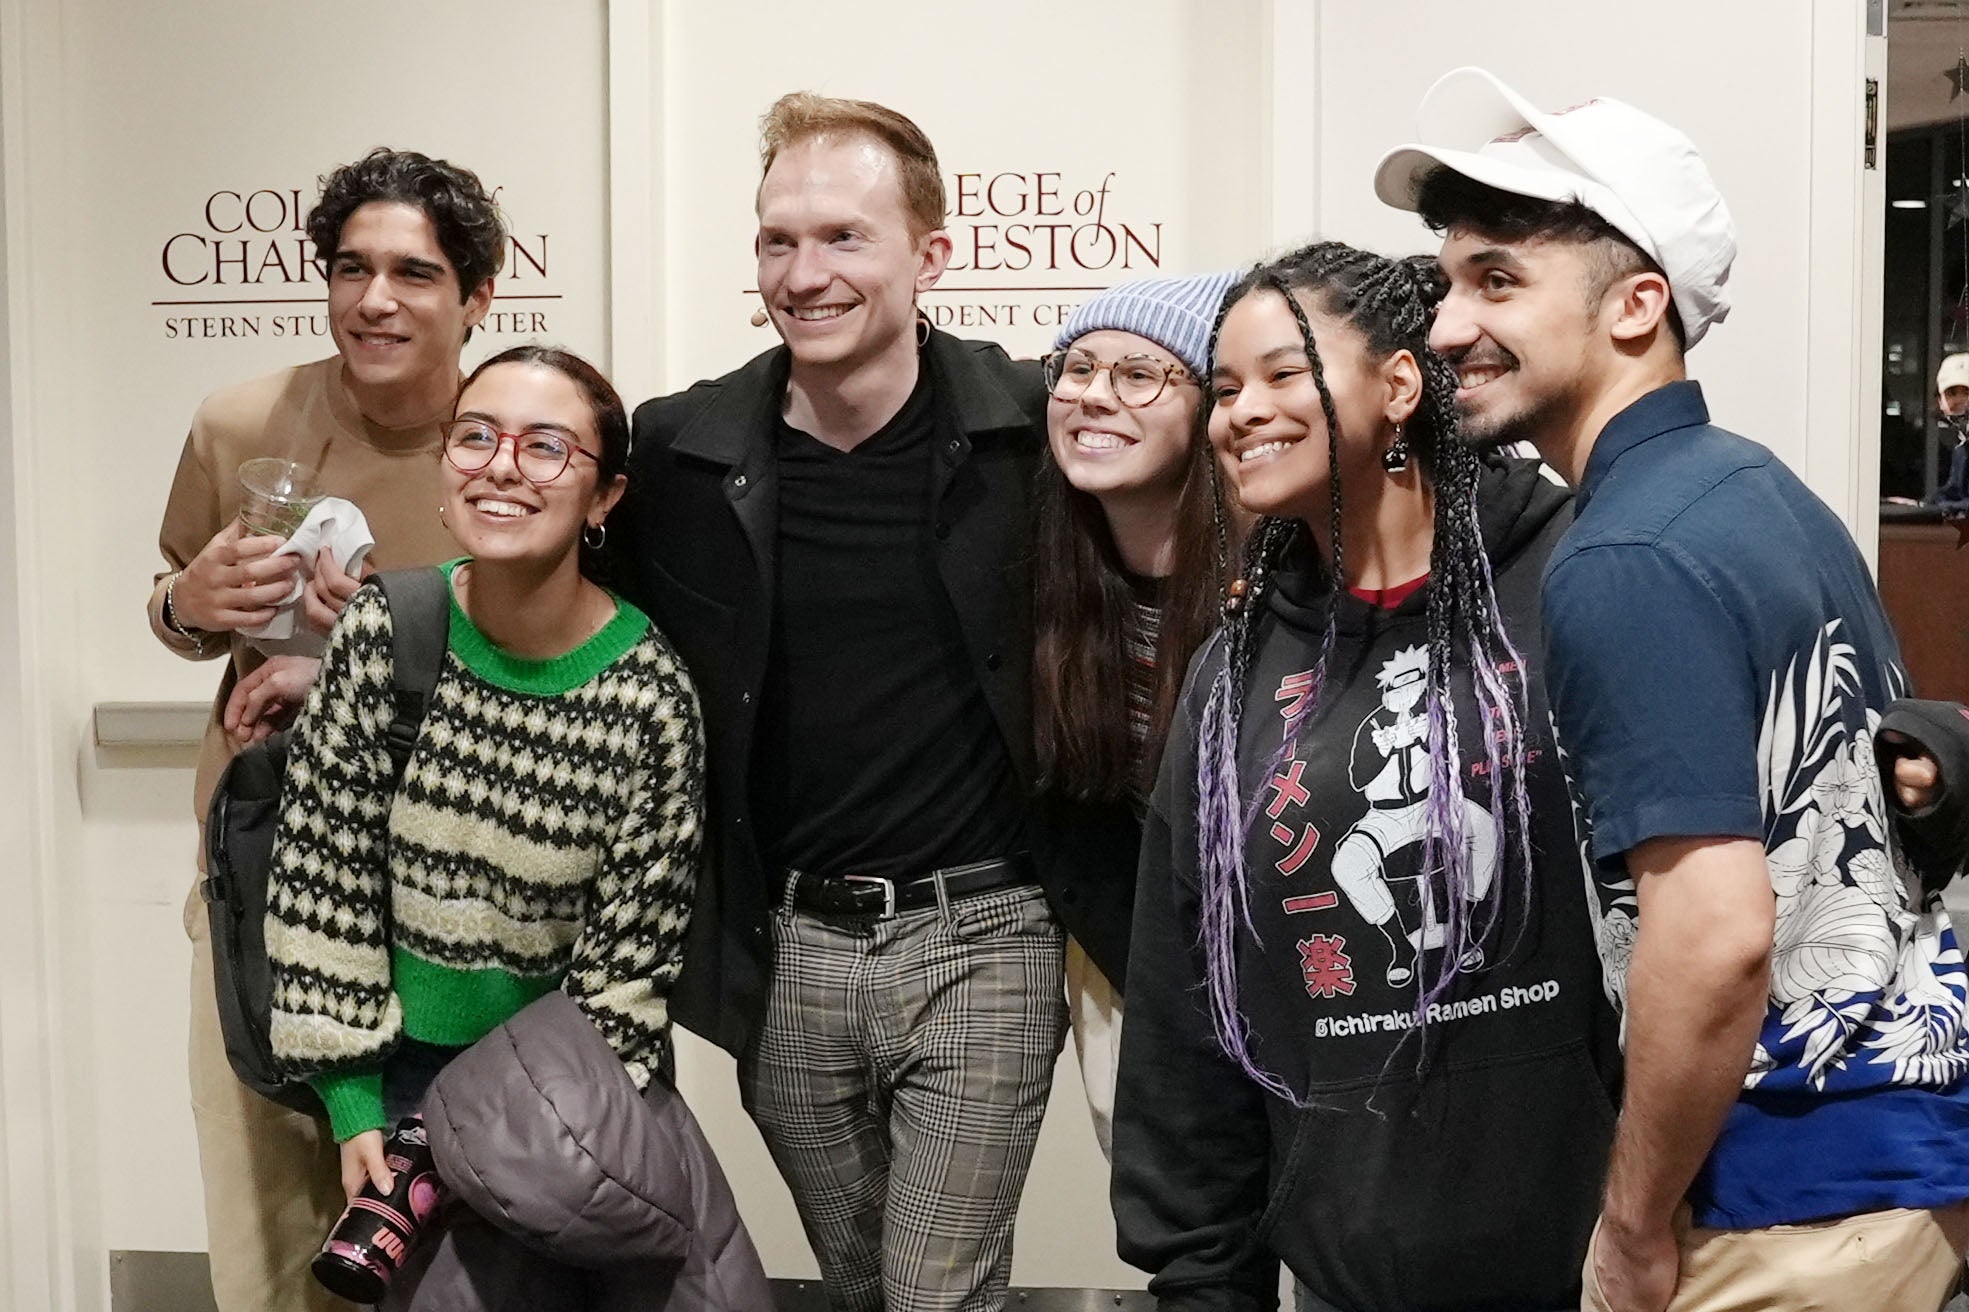 Trigg Watson magician poses with students at stern center